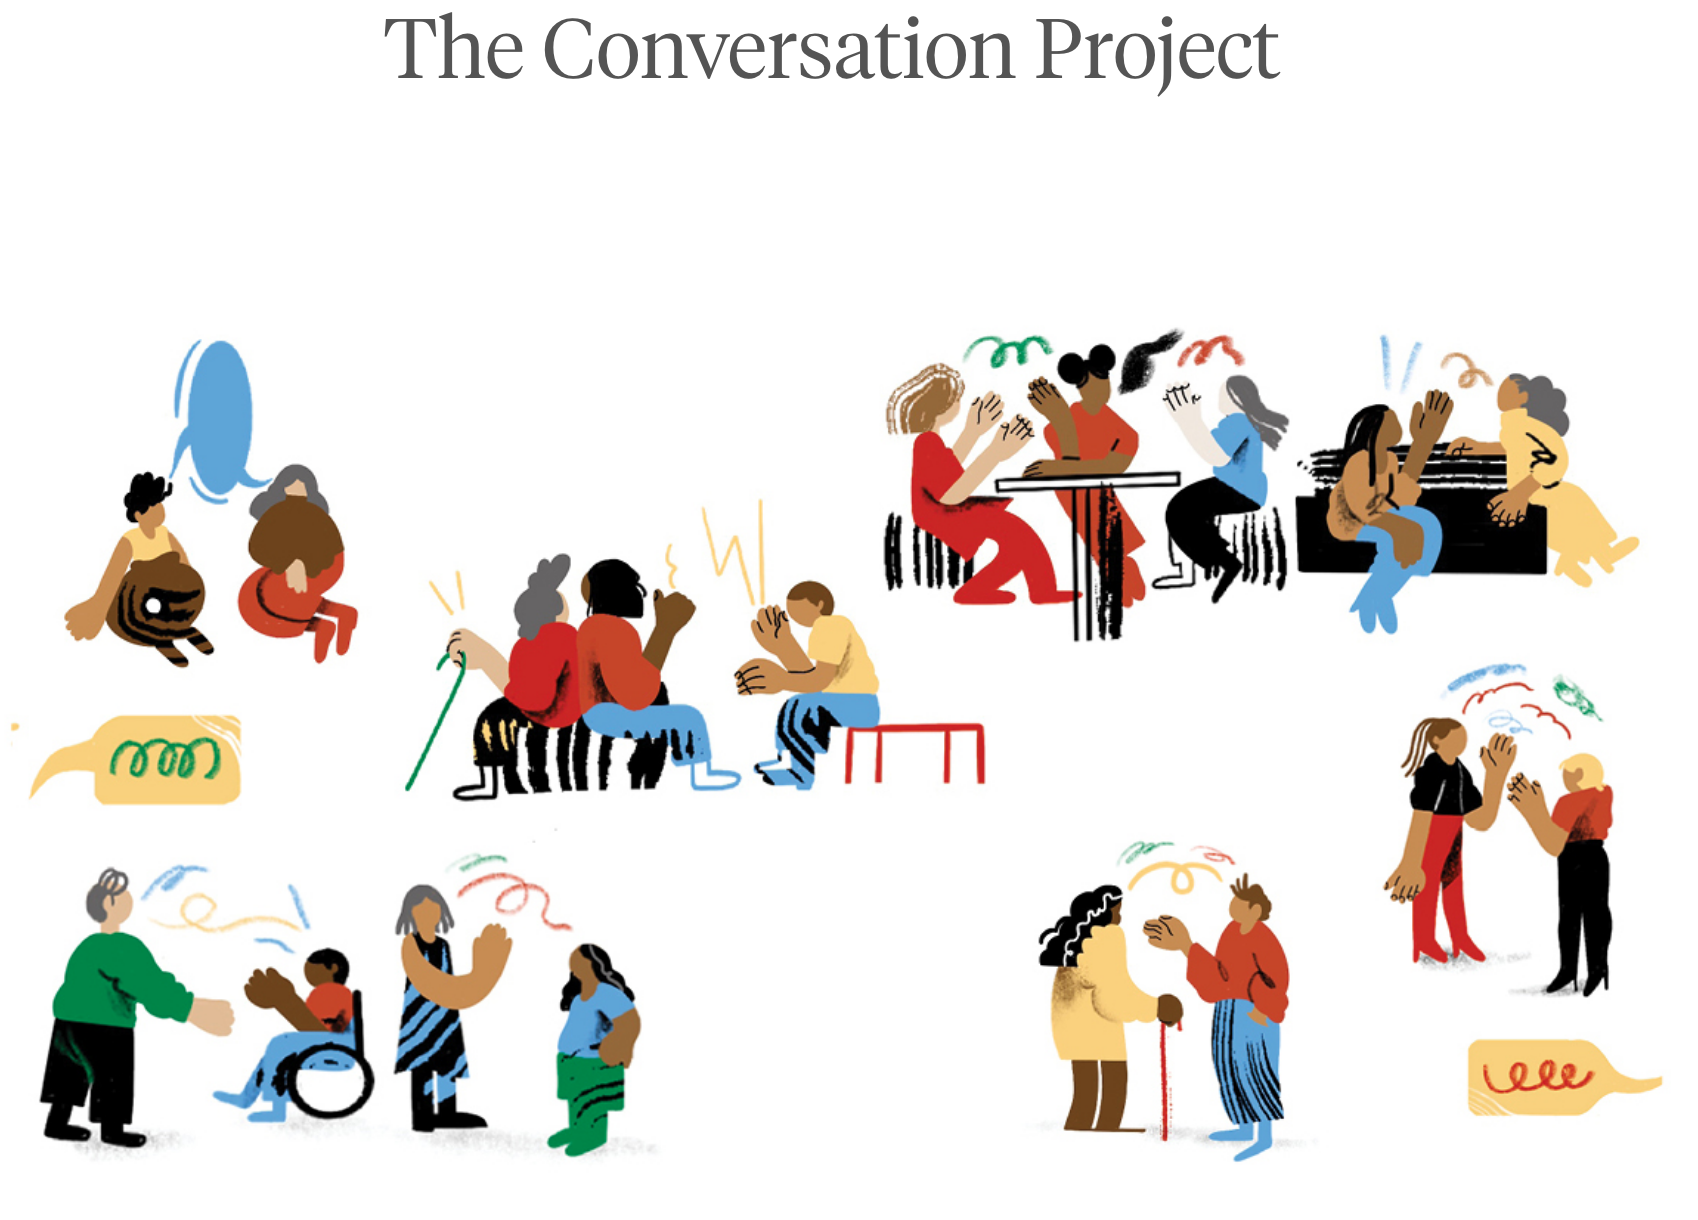 Image of many people all over town doing different projects together while conversing.